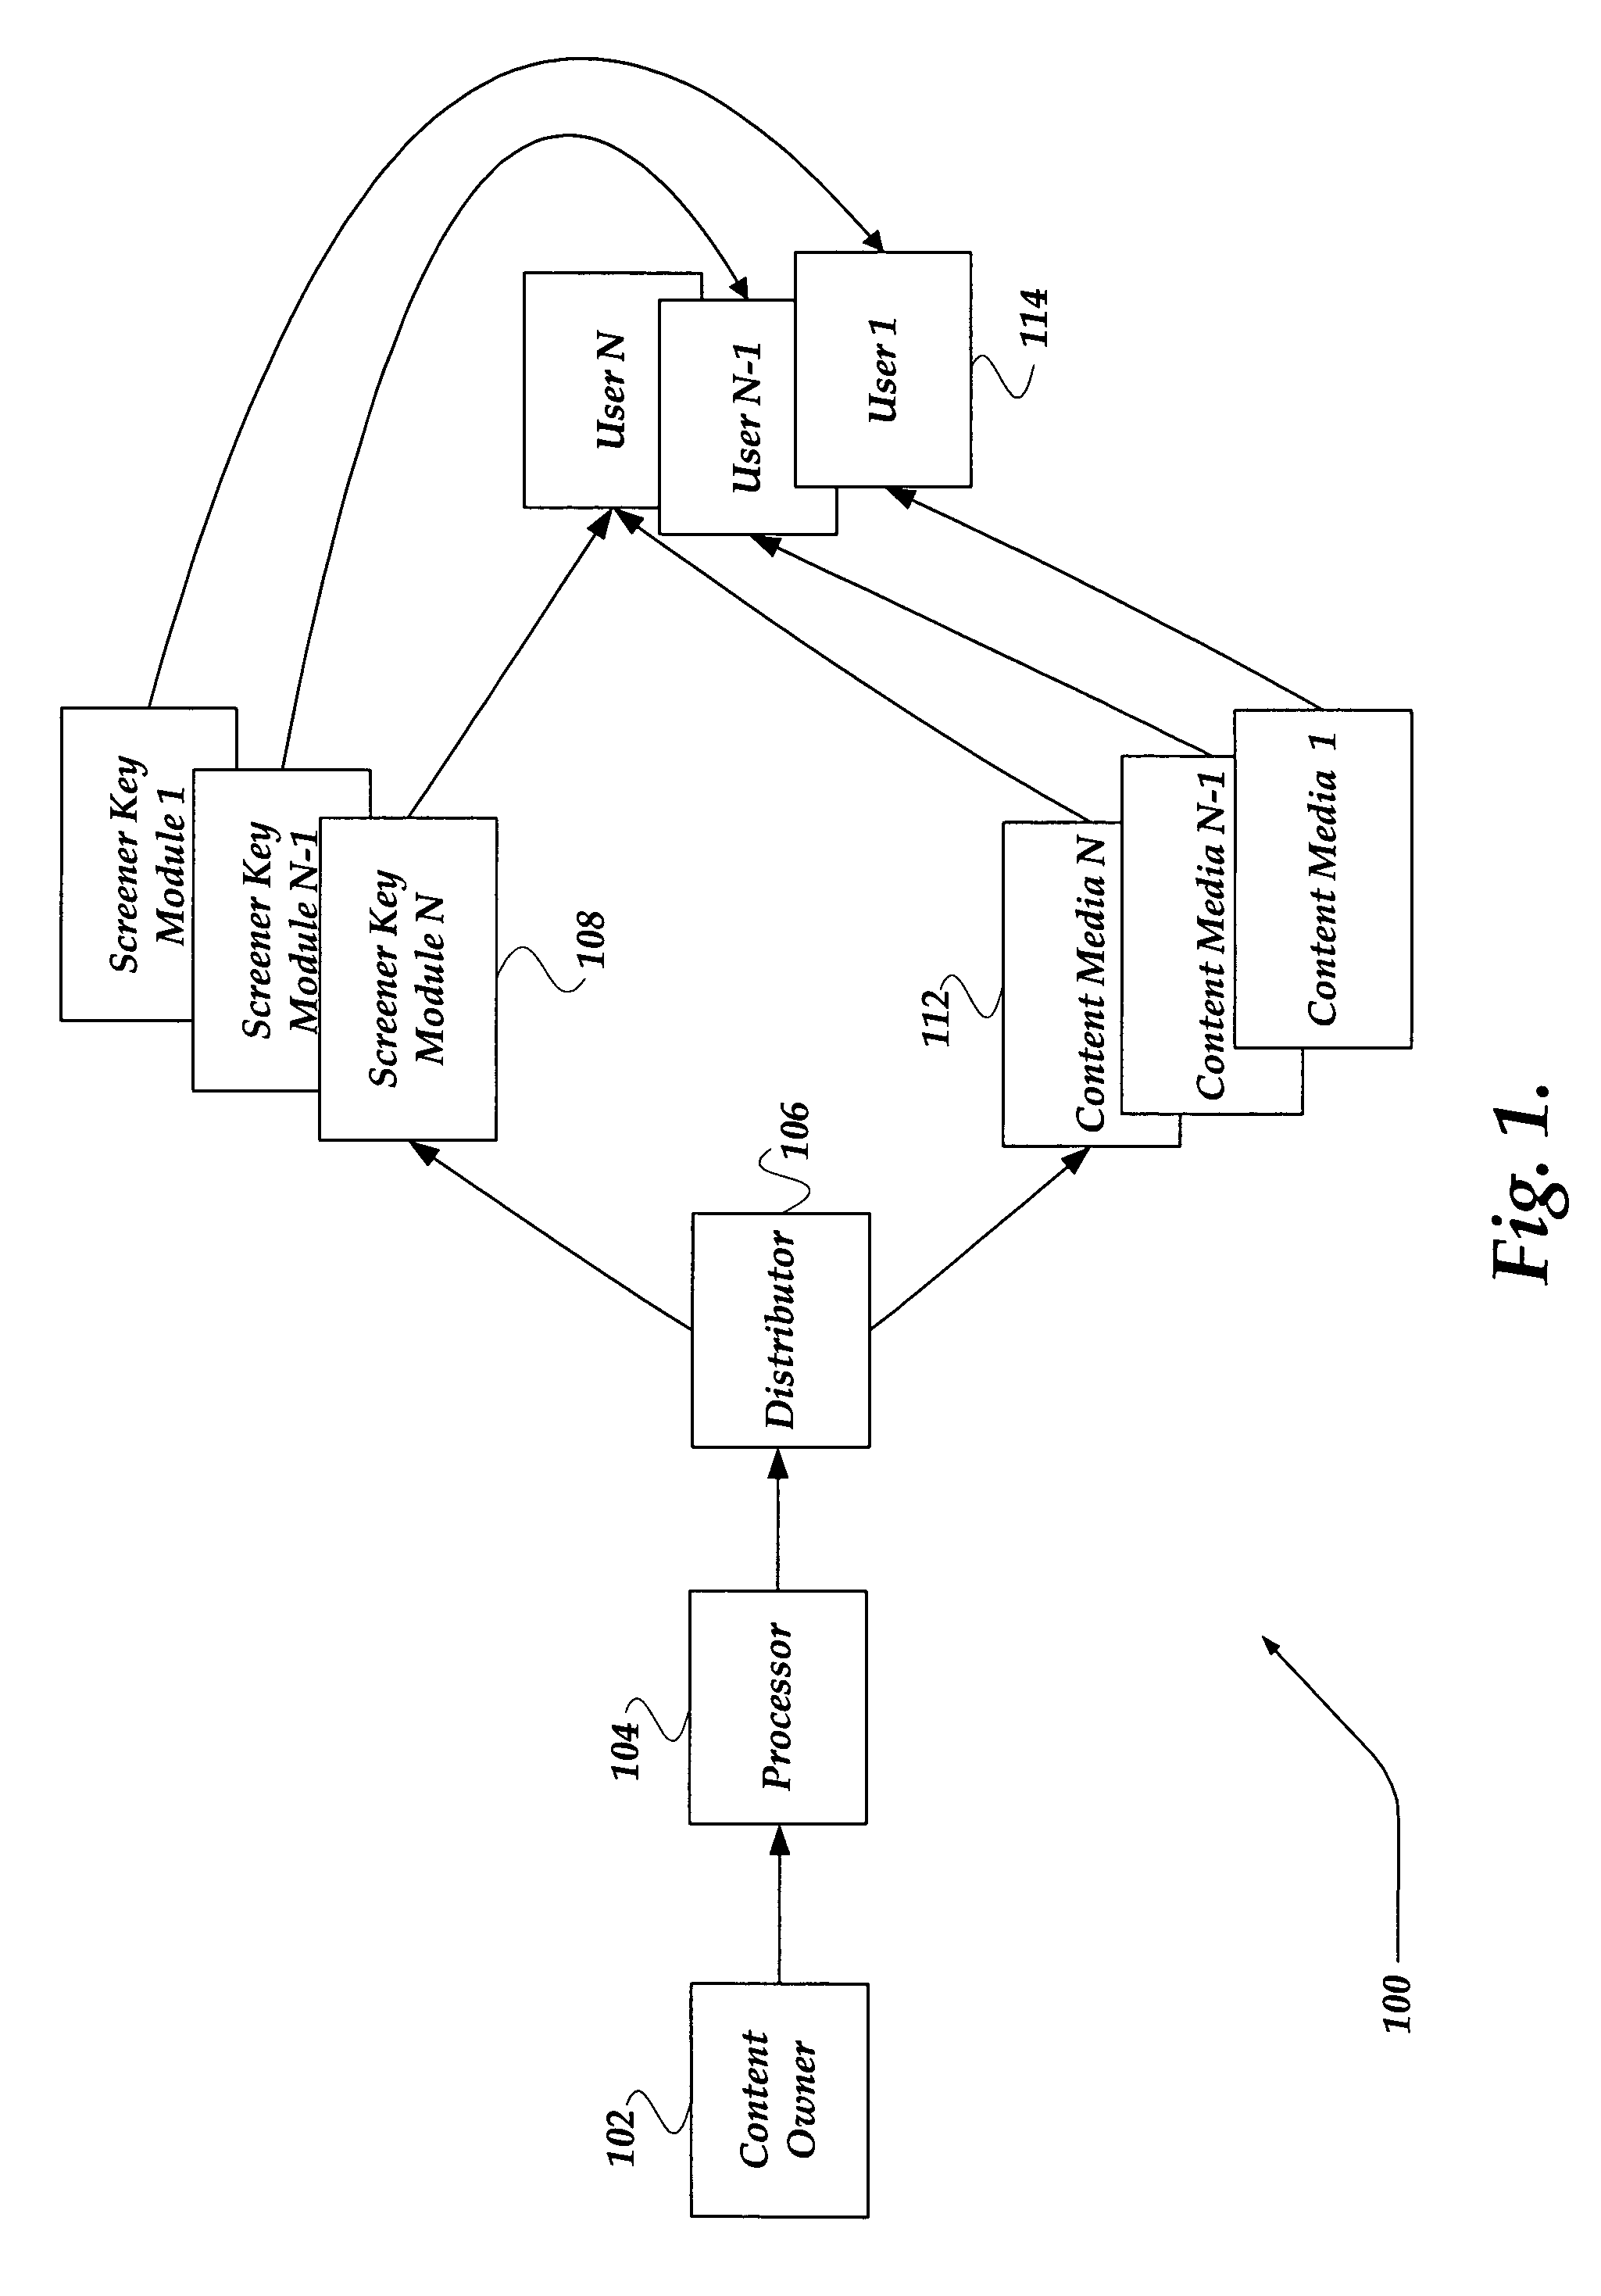 System, method, and apparatus for securely providing content viewable on a secure device